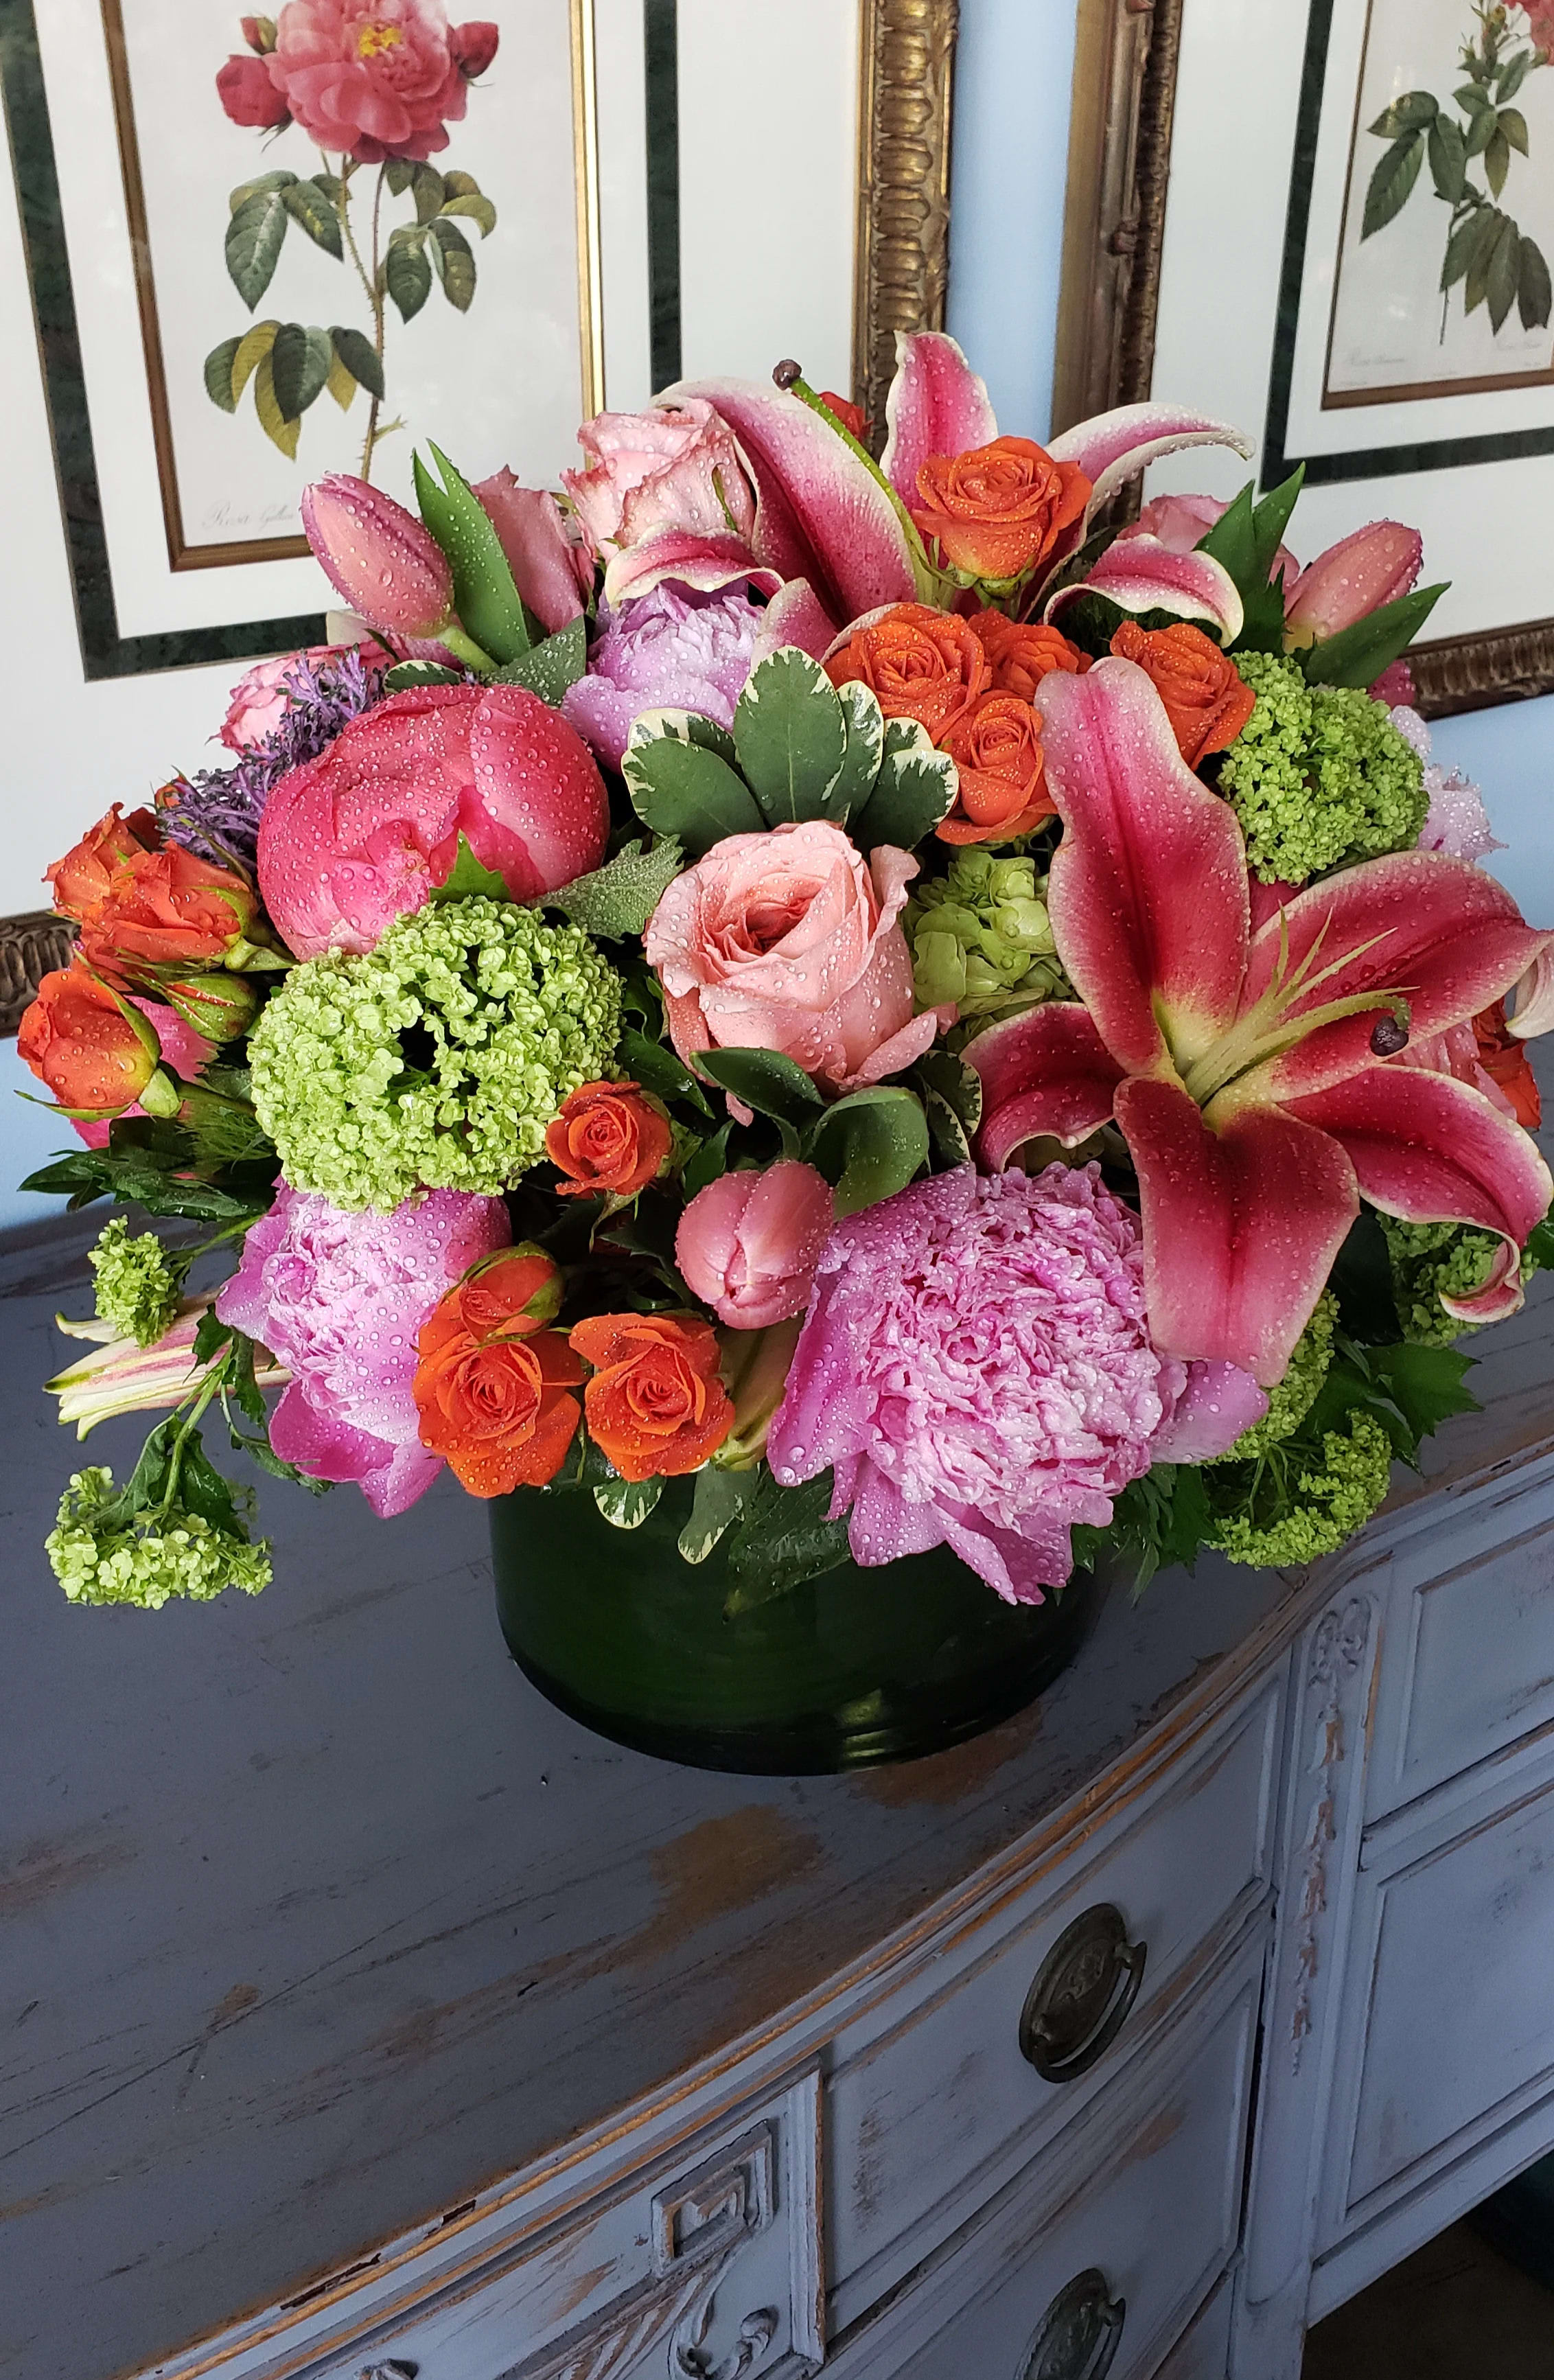 Vivid Euphoria  - Elegant cylinder filled with summer vivid flowers such as coral peonies, oriental lilies, pink garden roses, verbarium blooms, green hydrangeas, tulips, and spray roses.  **Pot color may vary**  At Belden's Florist we stand behind the quality of our products. We guarantee that our flowers will remain fresh and beautiful for 3-5 days after delivery. As cut flowers, they may naturally start to wilt beyond this timeframe. However, we ensure that you receive the freshest blooms possible, carefully selected and expertly arranged to bring joy and elegance to your space. To help your flowers stay fresher longer, we recommend adding fresh water to the vase regularly. Just like you, flowers need hydration to thrive, and refreshing the water allows them to drink up and continue to dazzle you with their beauty.